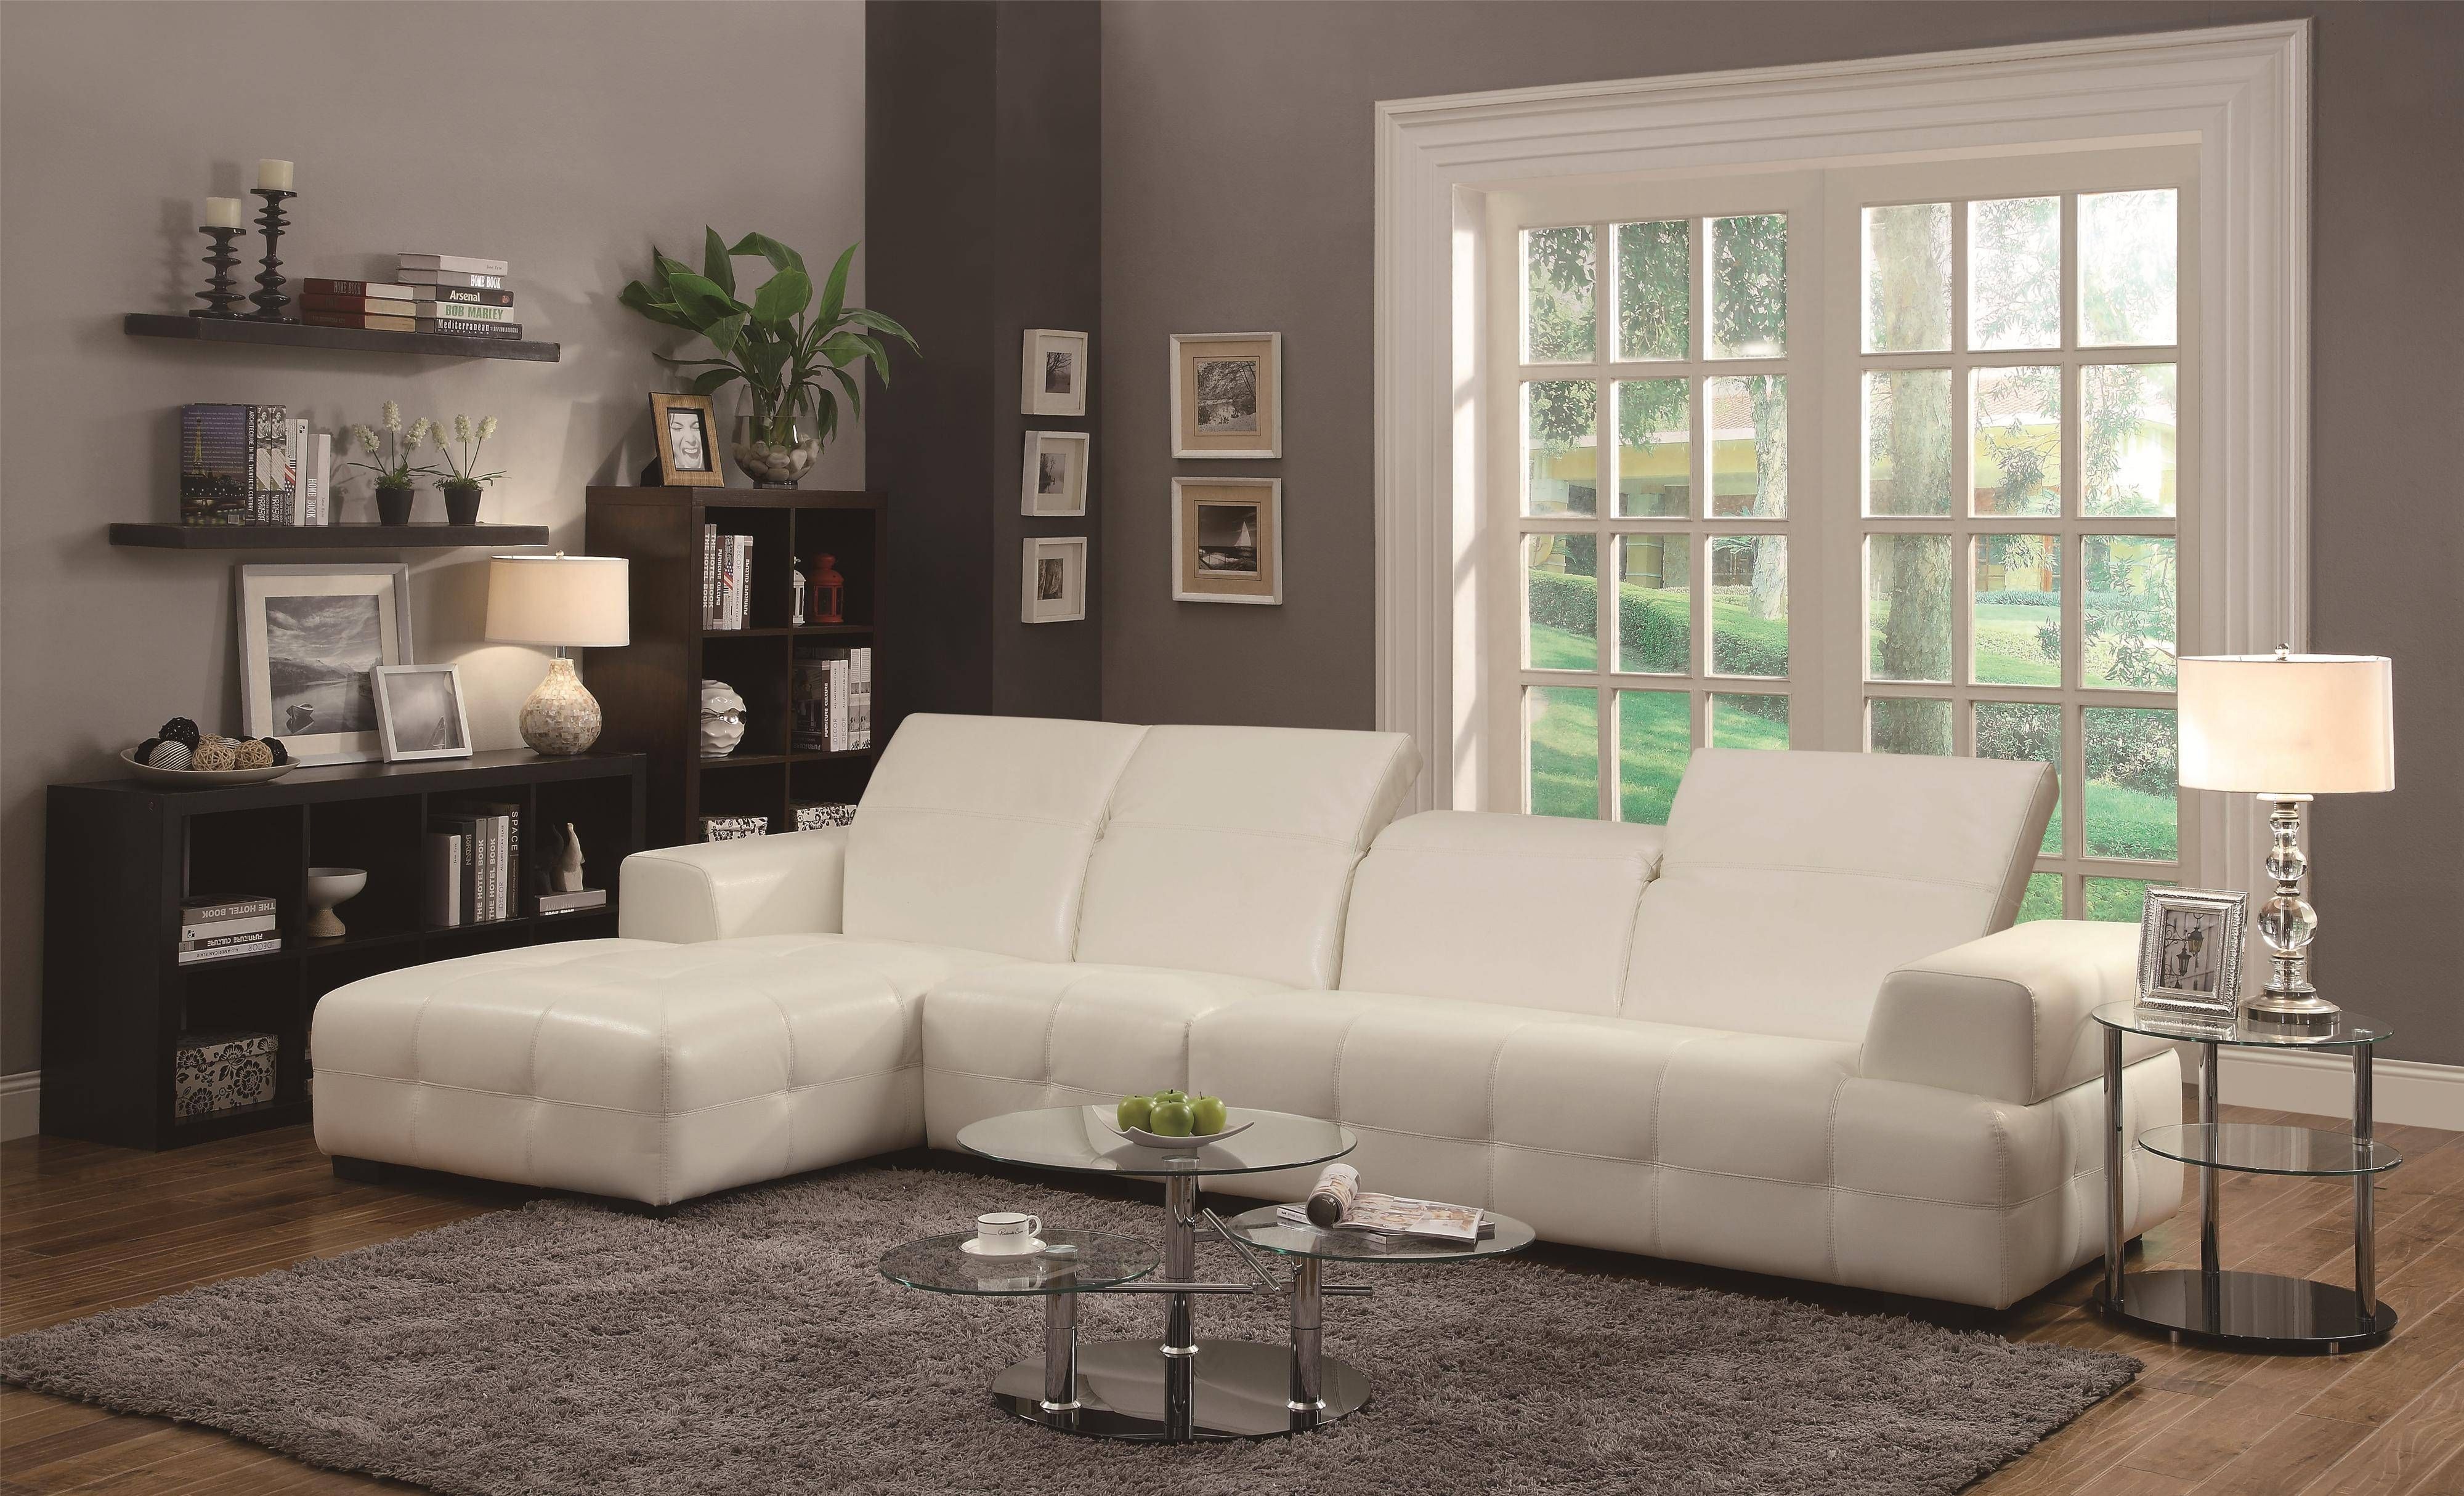 Coaster Darby Contemporary Sectional Sofa With Wide Arms – Coaster Within Coaster Sectional Sofas (View 14 of 15)